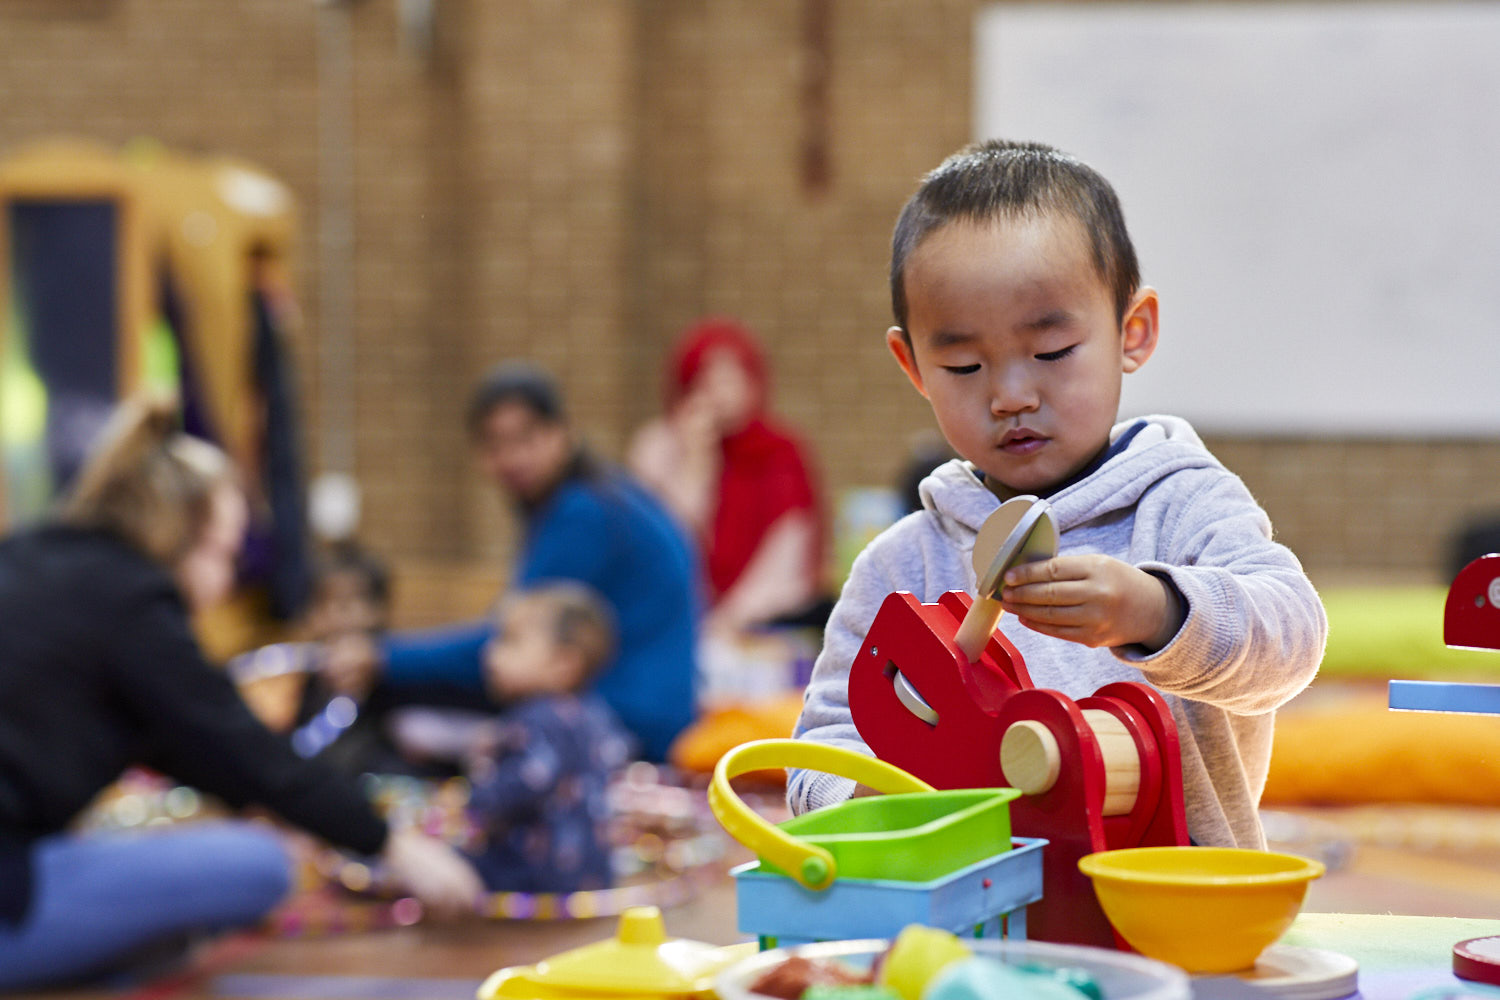 A young child sitting at a table with wooden toys. Adults and children are playing in the background.